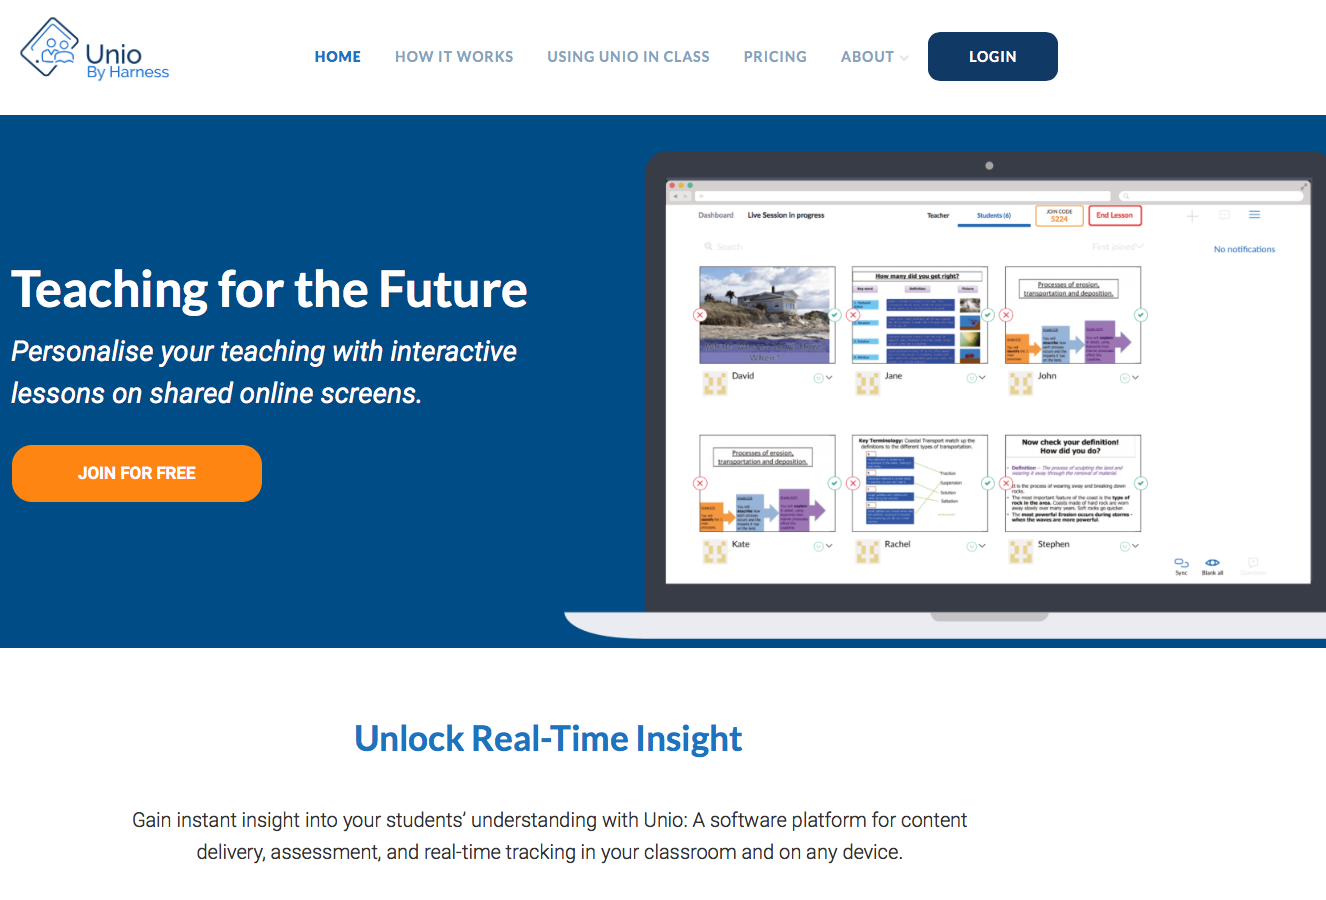 Deliver lessons with Unio